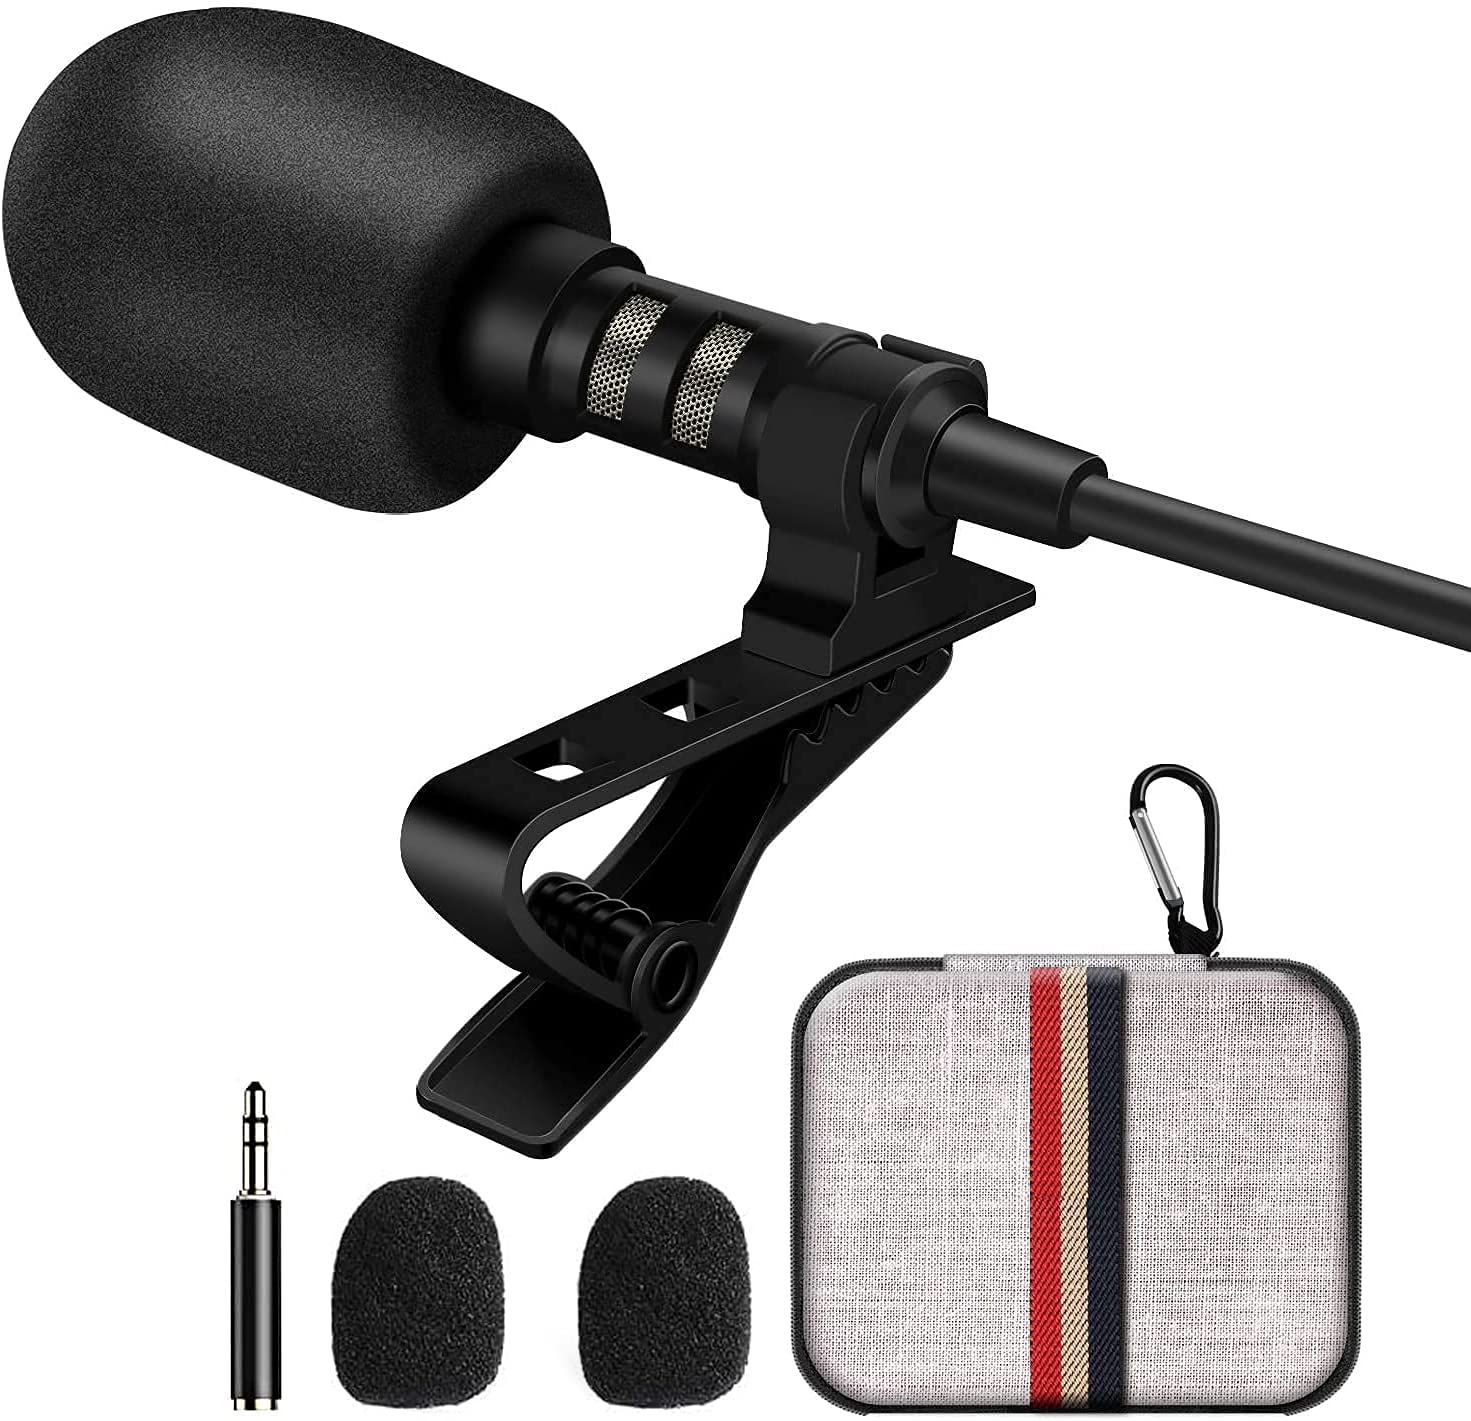 DIGITNOW Professional Lavalier Lapel Microphone Voice Omnidirectional Condenser Mic for iPhone Android Smartphone Laptop PC Computer,Recording Mic for YouTube Interview Video